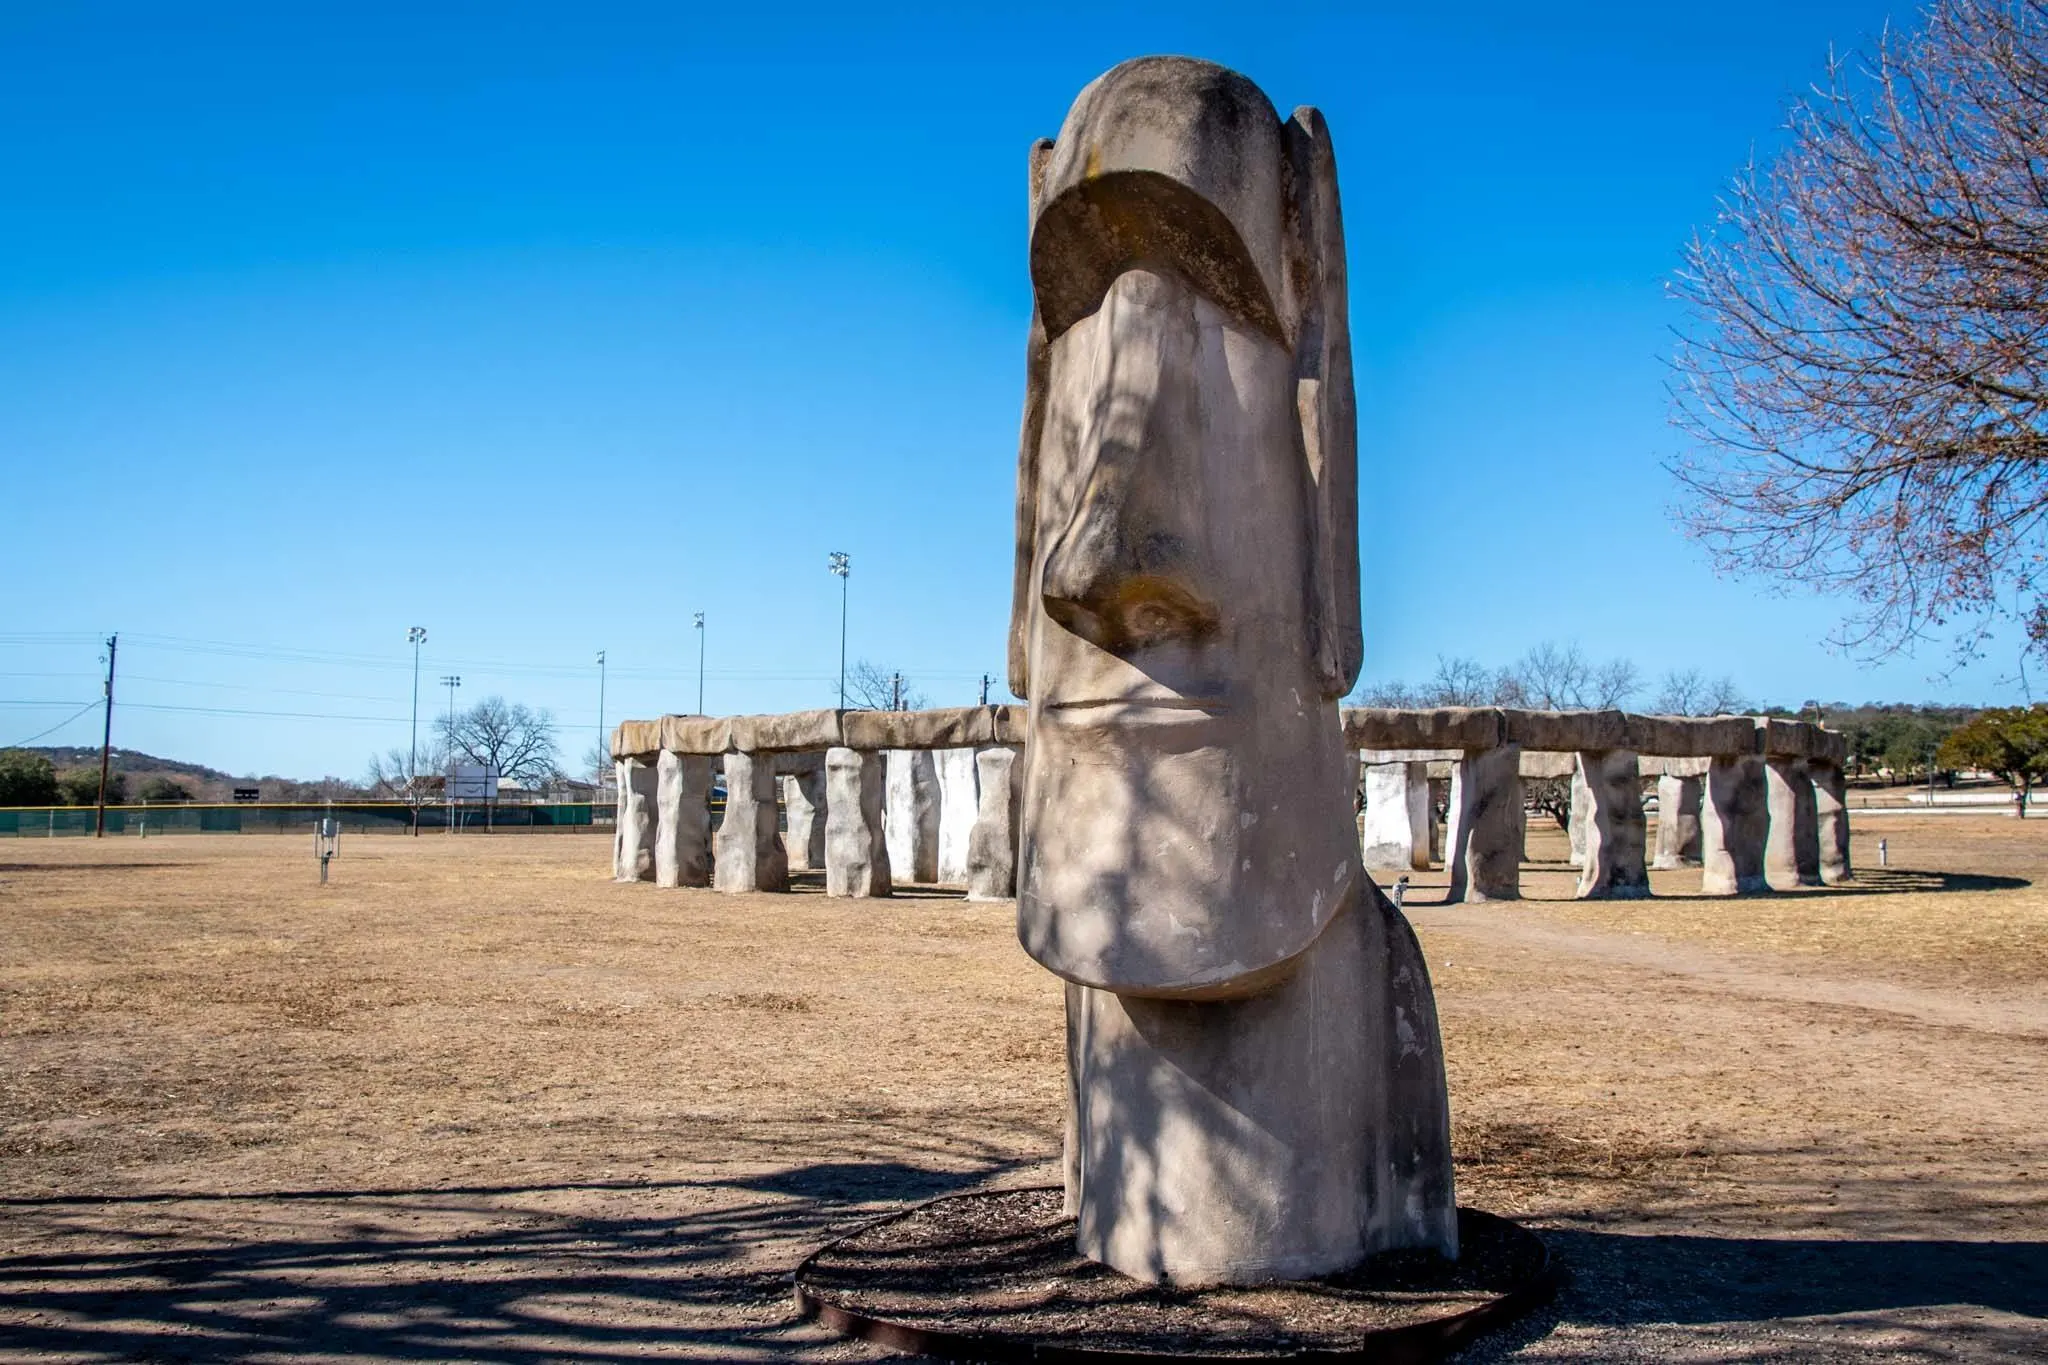 13-foot-tall stone head in front of a replica of Stonehenge